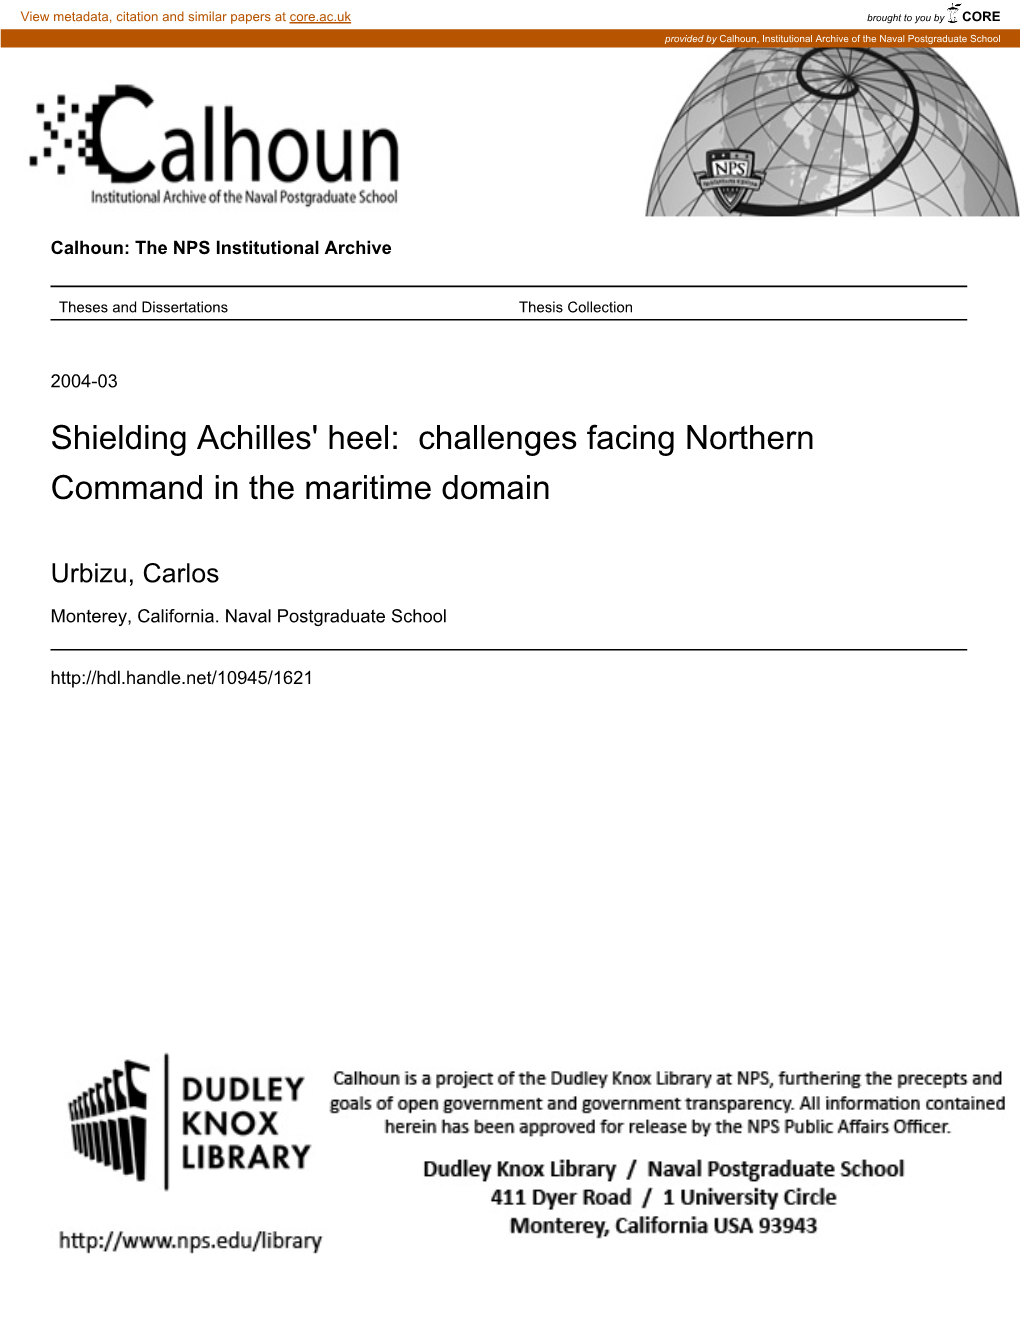 Challenges Facing Northern Command in the Maritime Domain